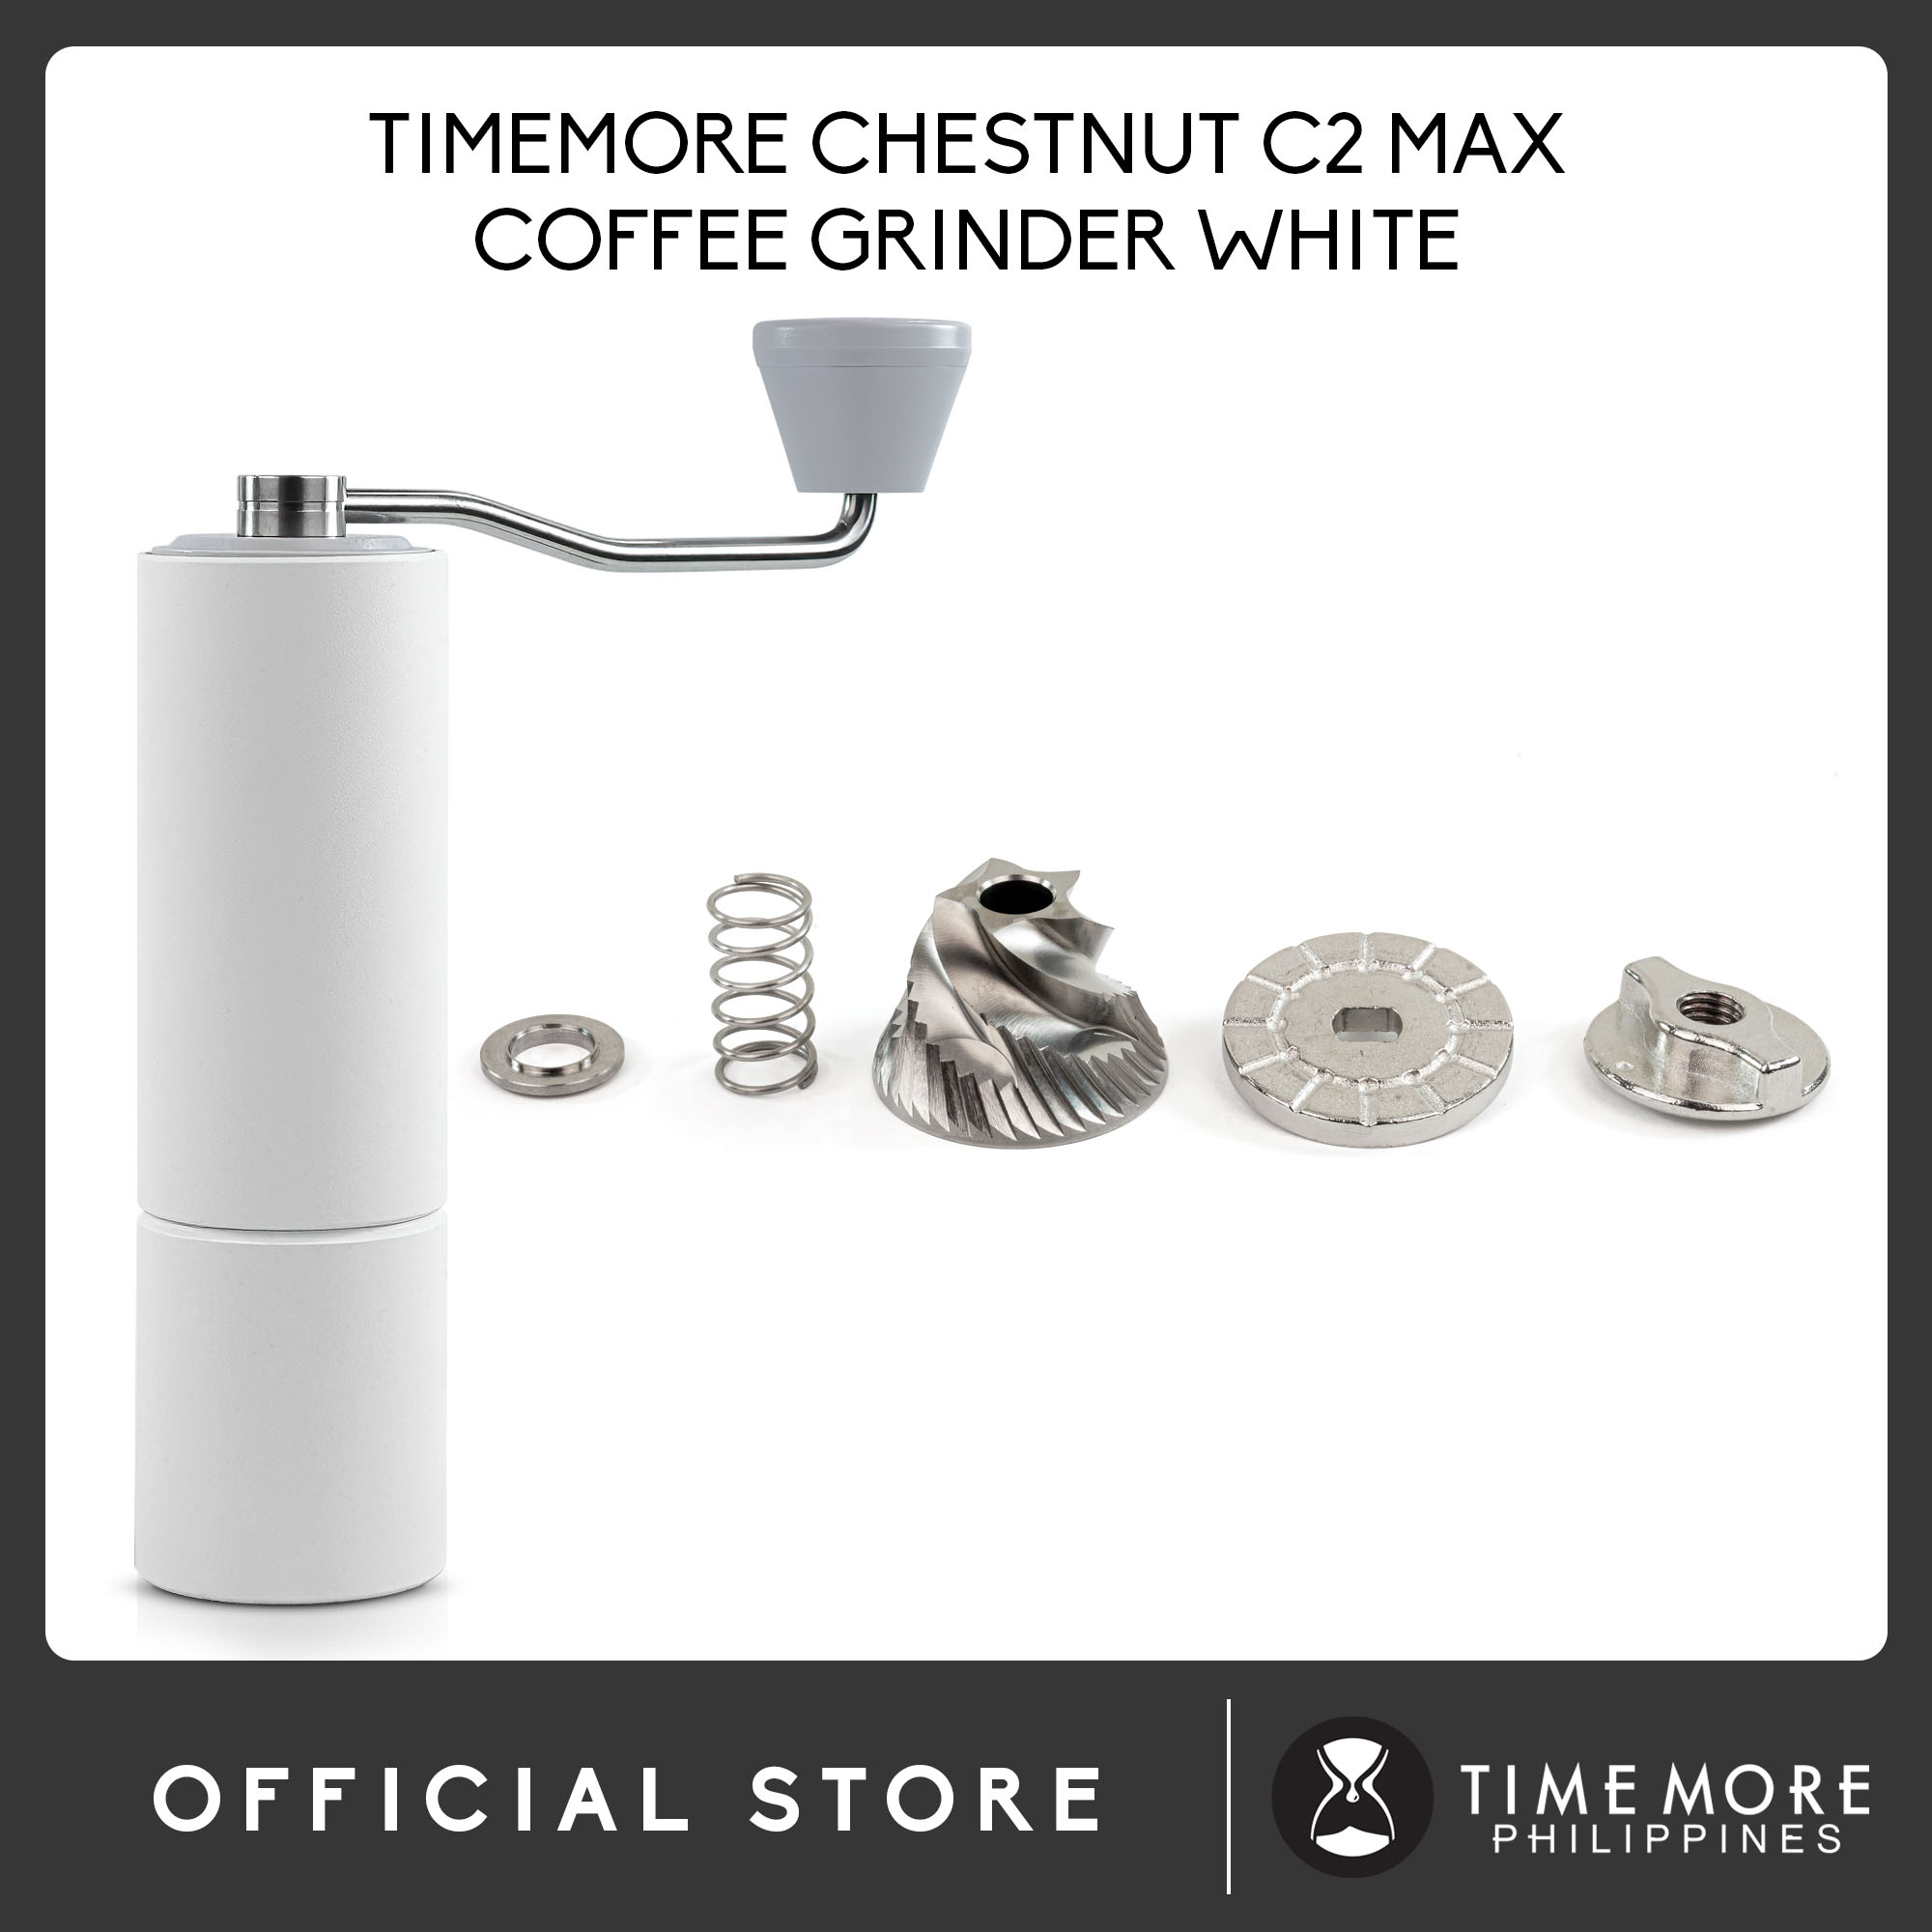 TIMEMORE Chestnut C2 MAX Manual Coffee Grinder White